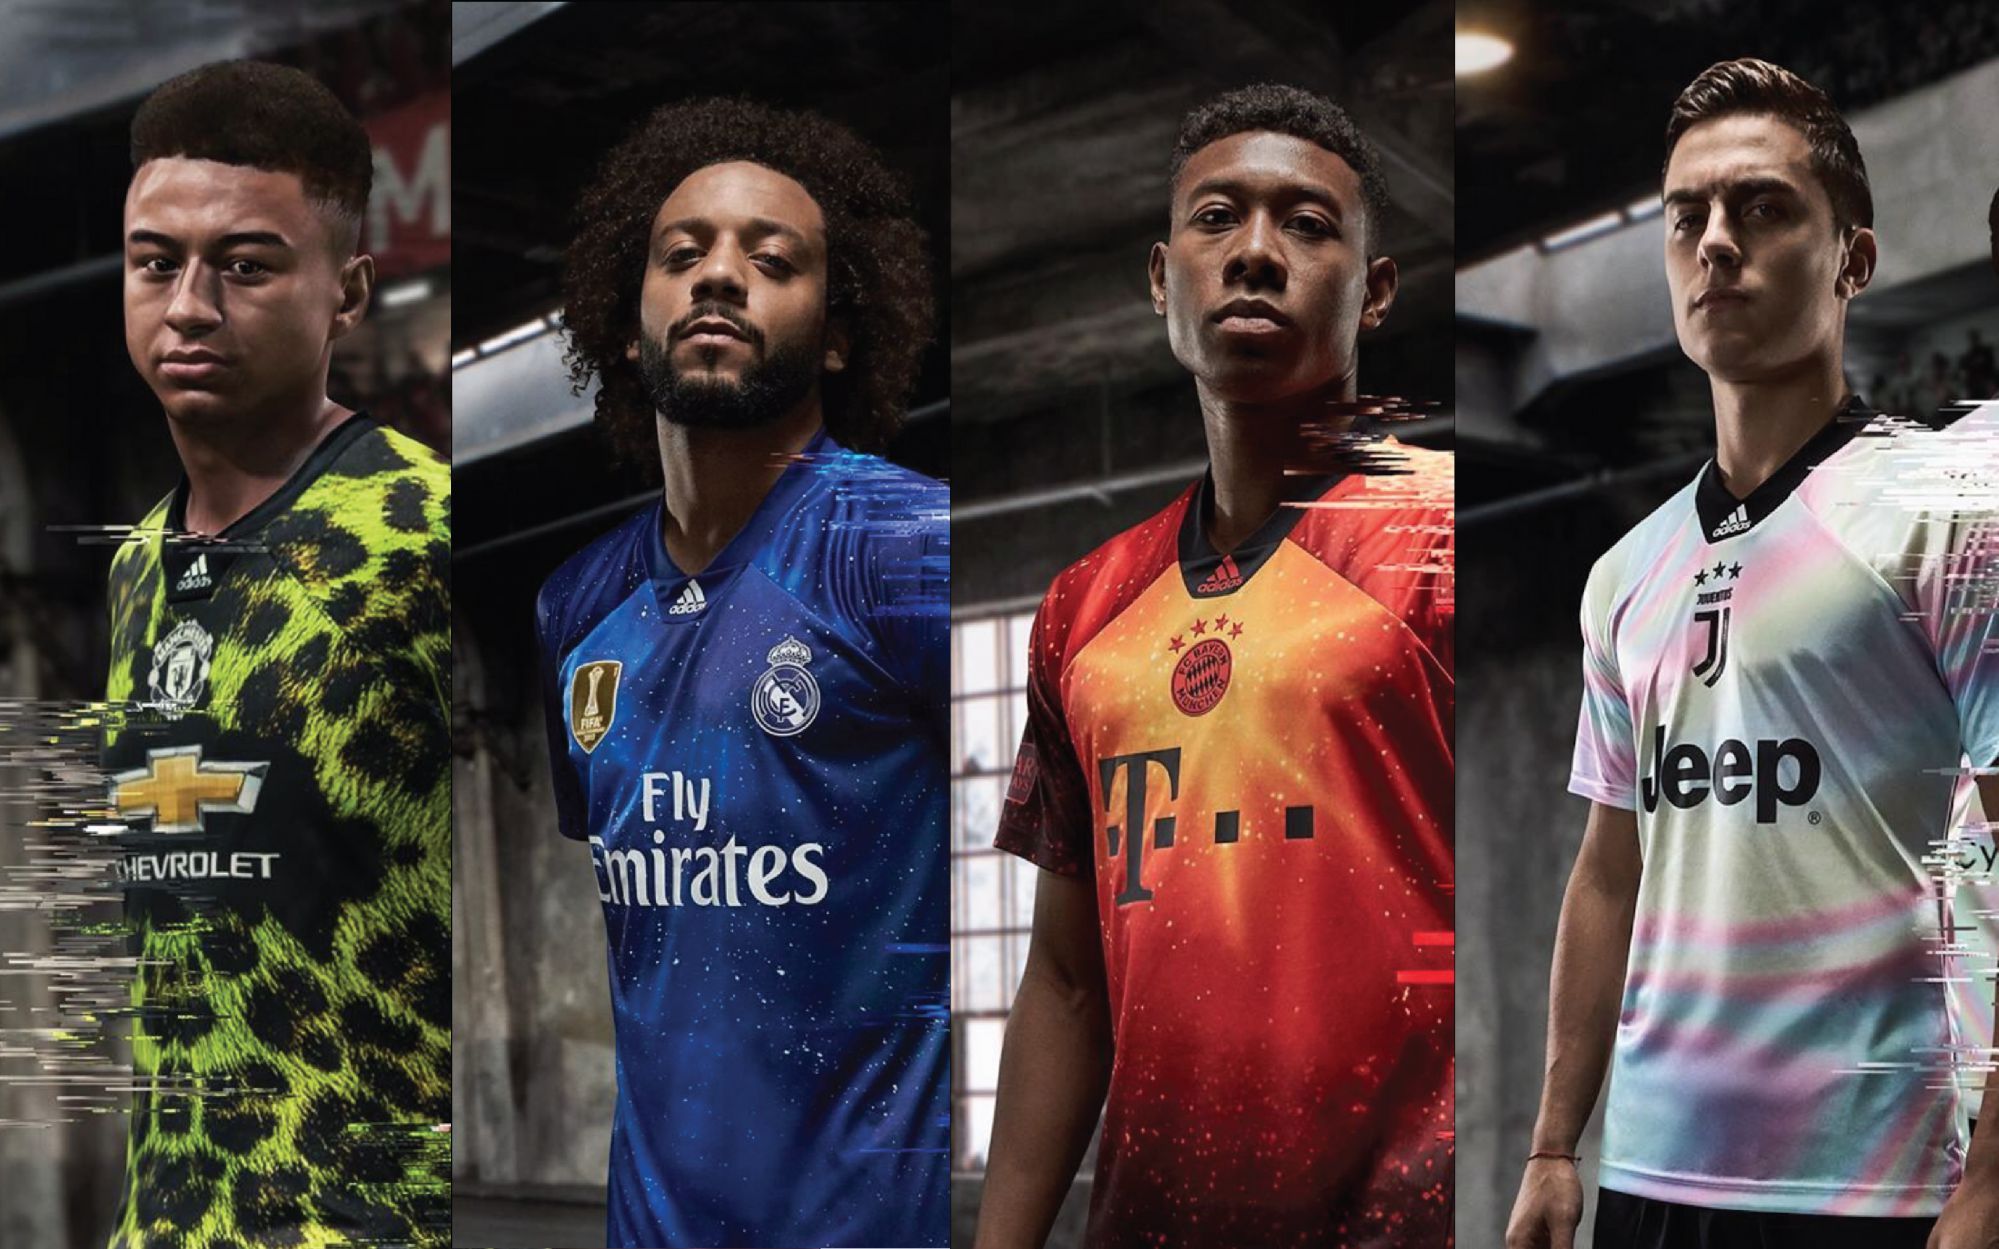 4 special jerseys in collaboration with EA Sports